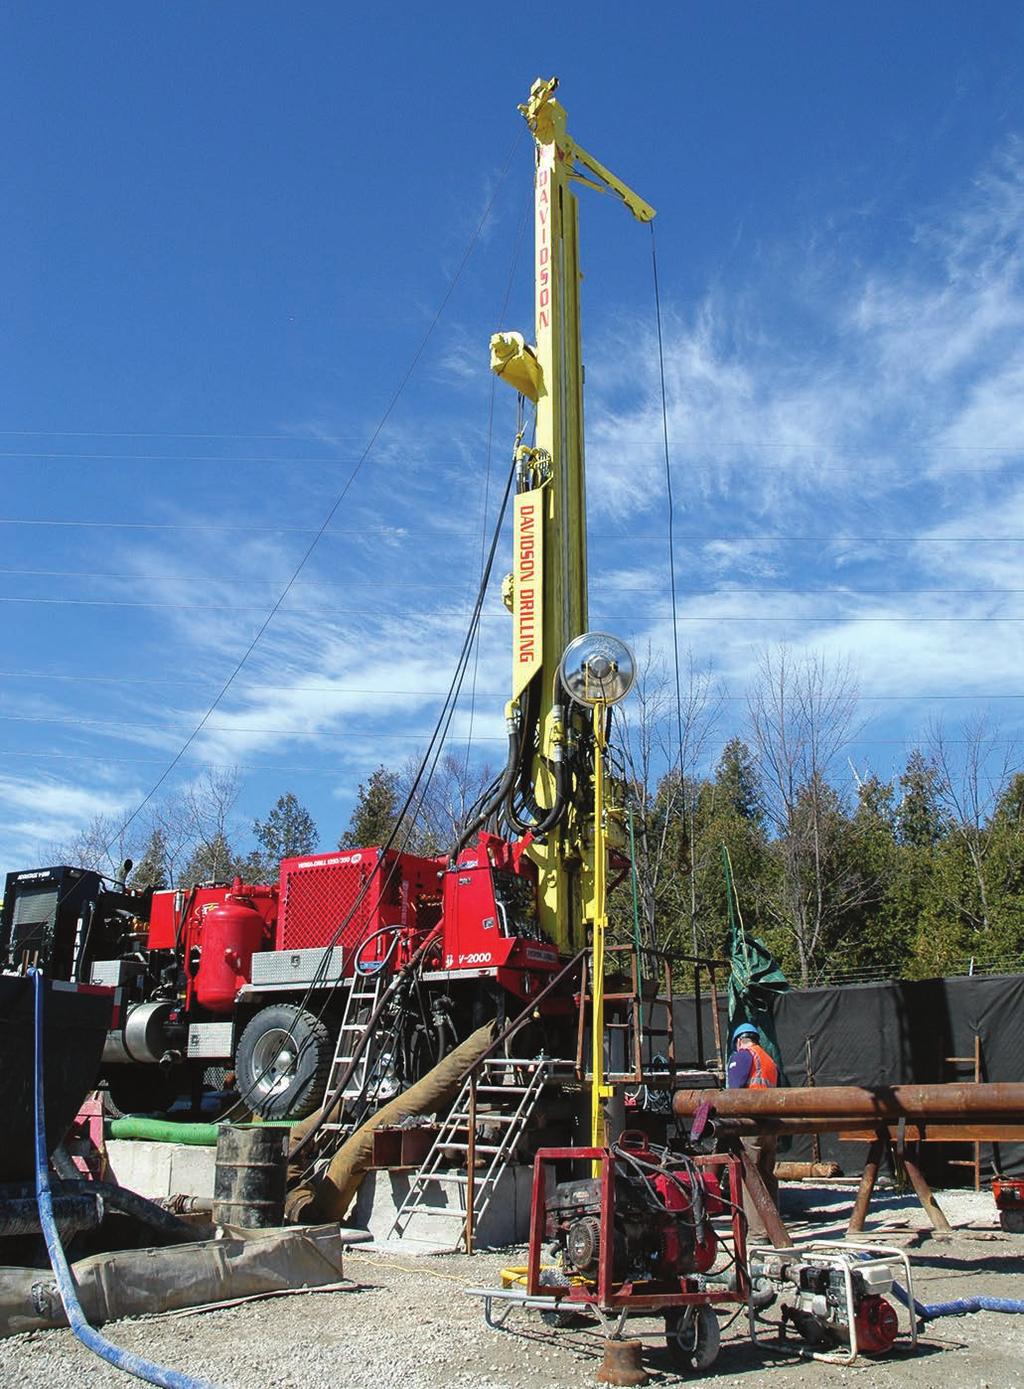 DRAFT Rotary drilling What equipment is used? Boreholes are drilled using a conventional truck-mounted or track-mounted rotary drill rig.